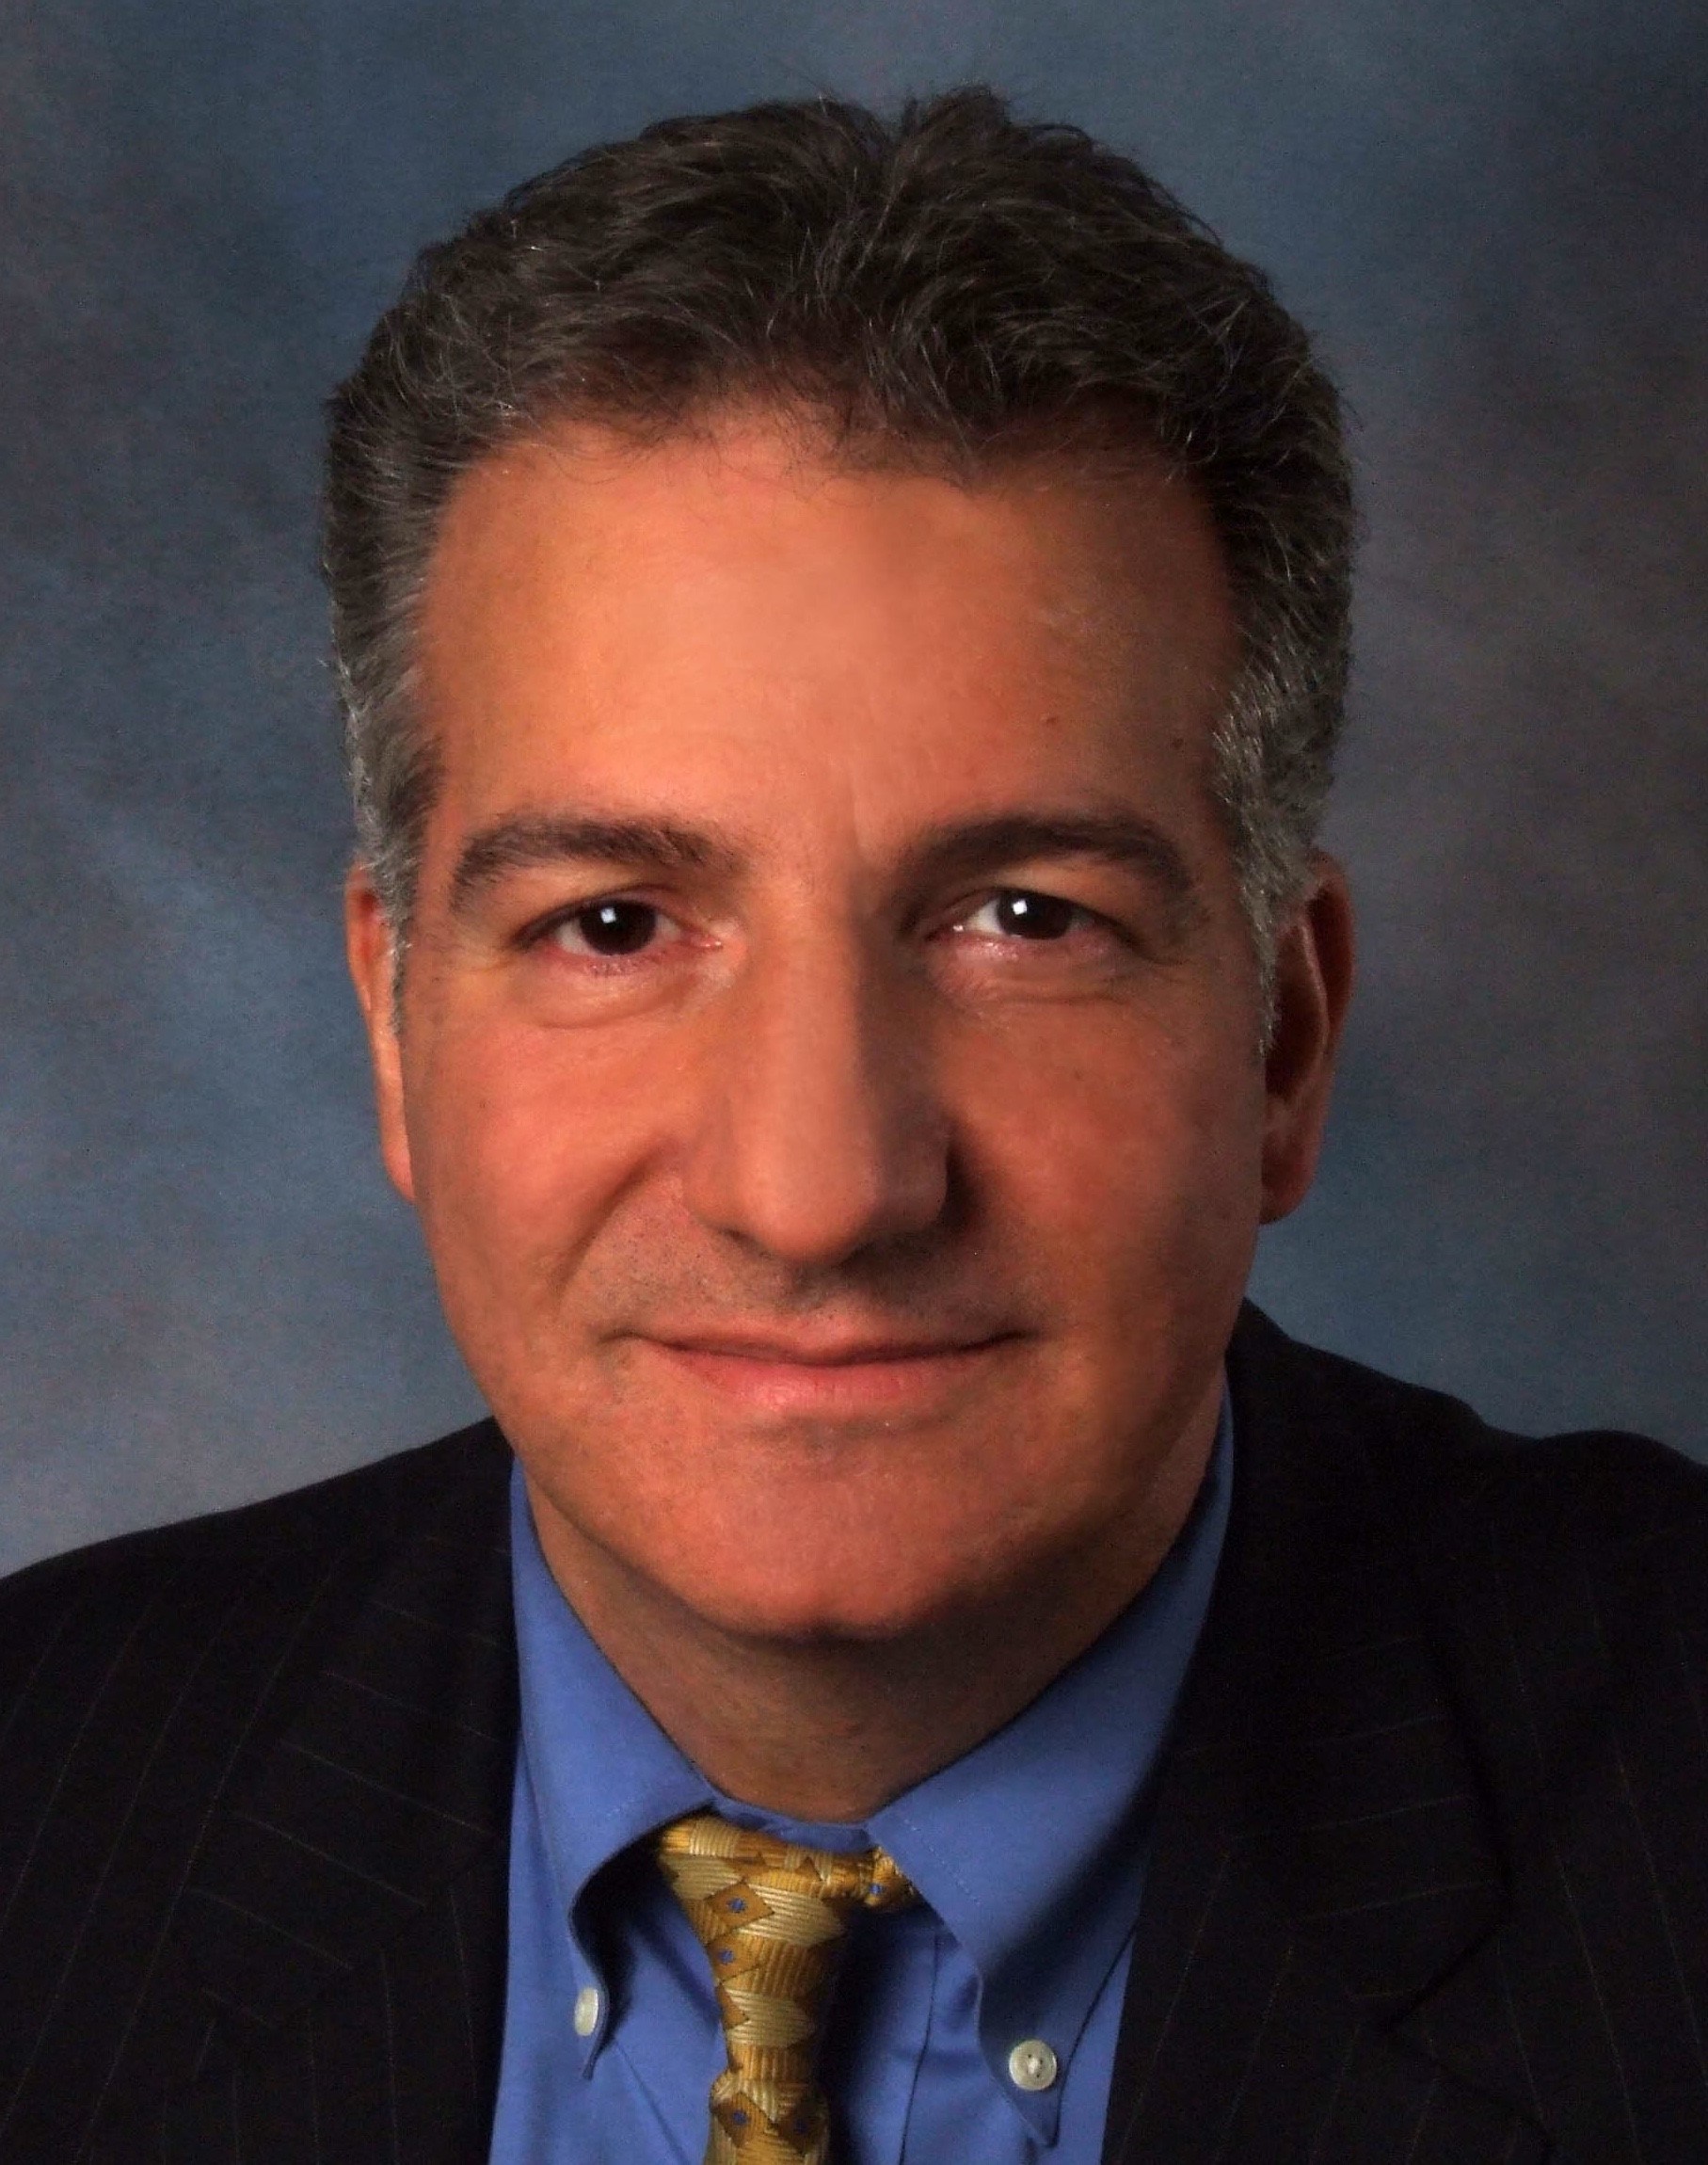 Black Knight Inc. has hired Peter Carrara as Chief Information Officer